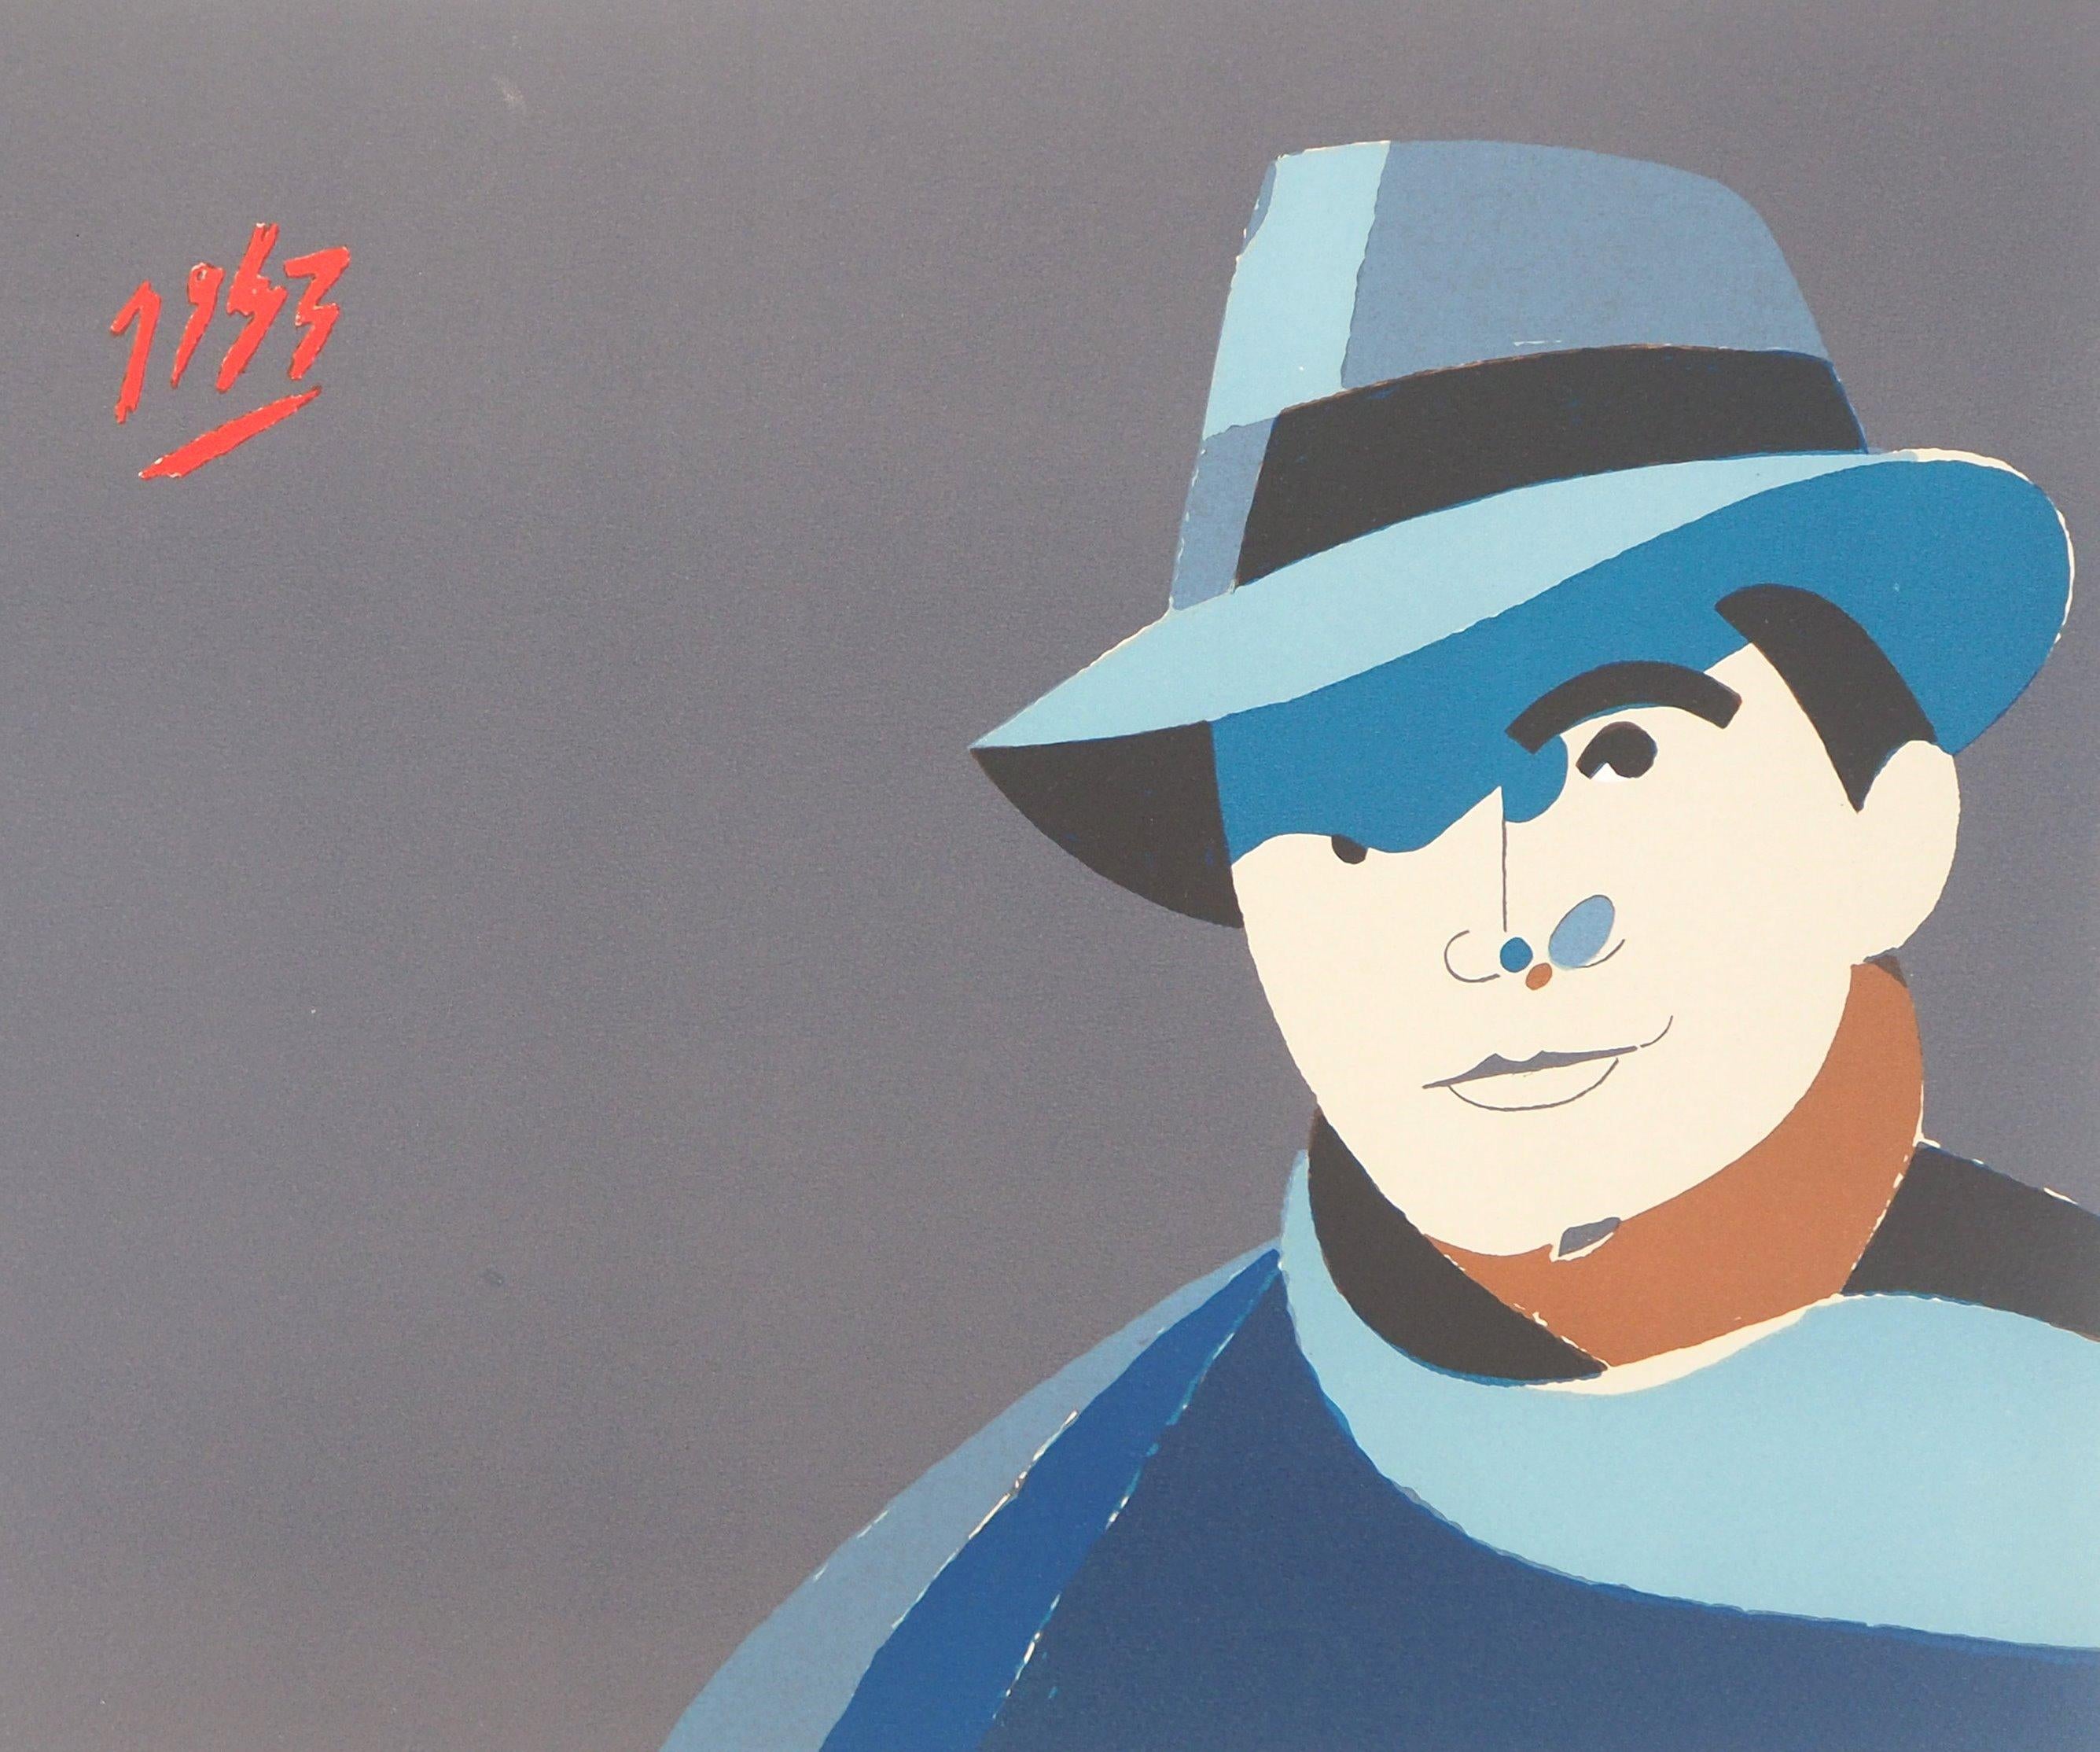 Jean Moulin, Man with Hat - Original Handsigned Lithograph - Gray Figurative Print by Eduardo Arroyo